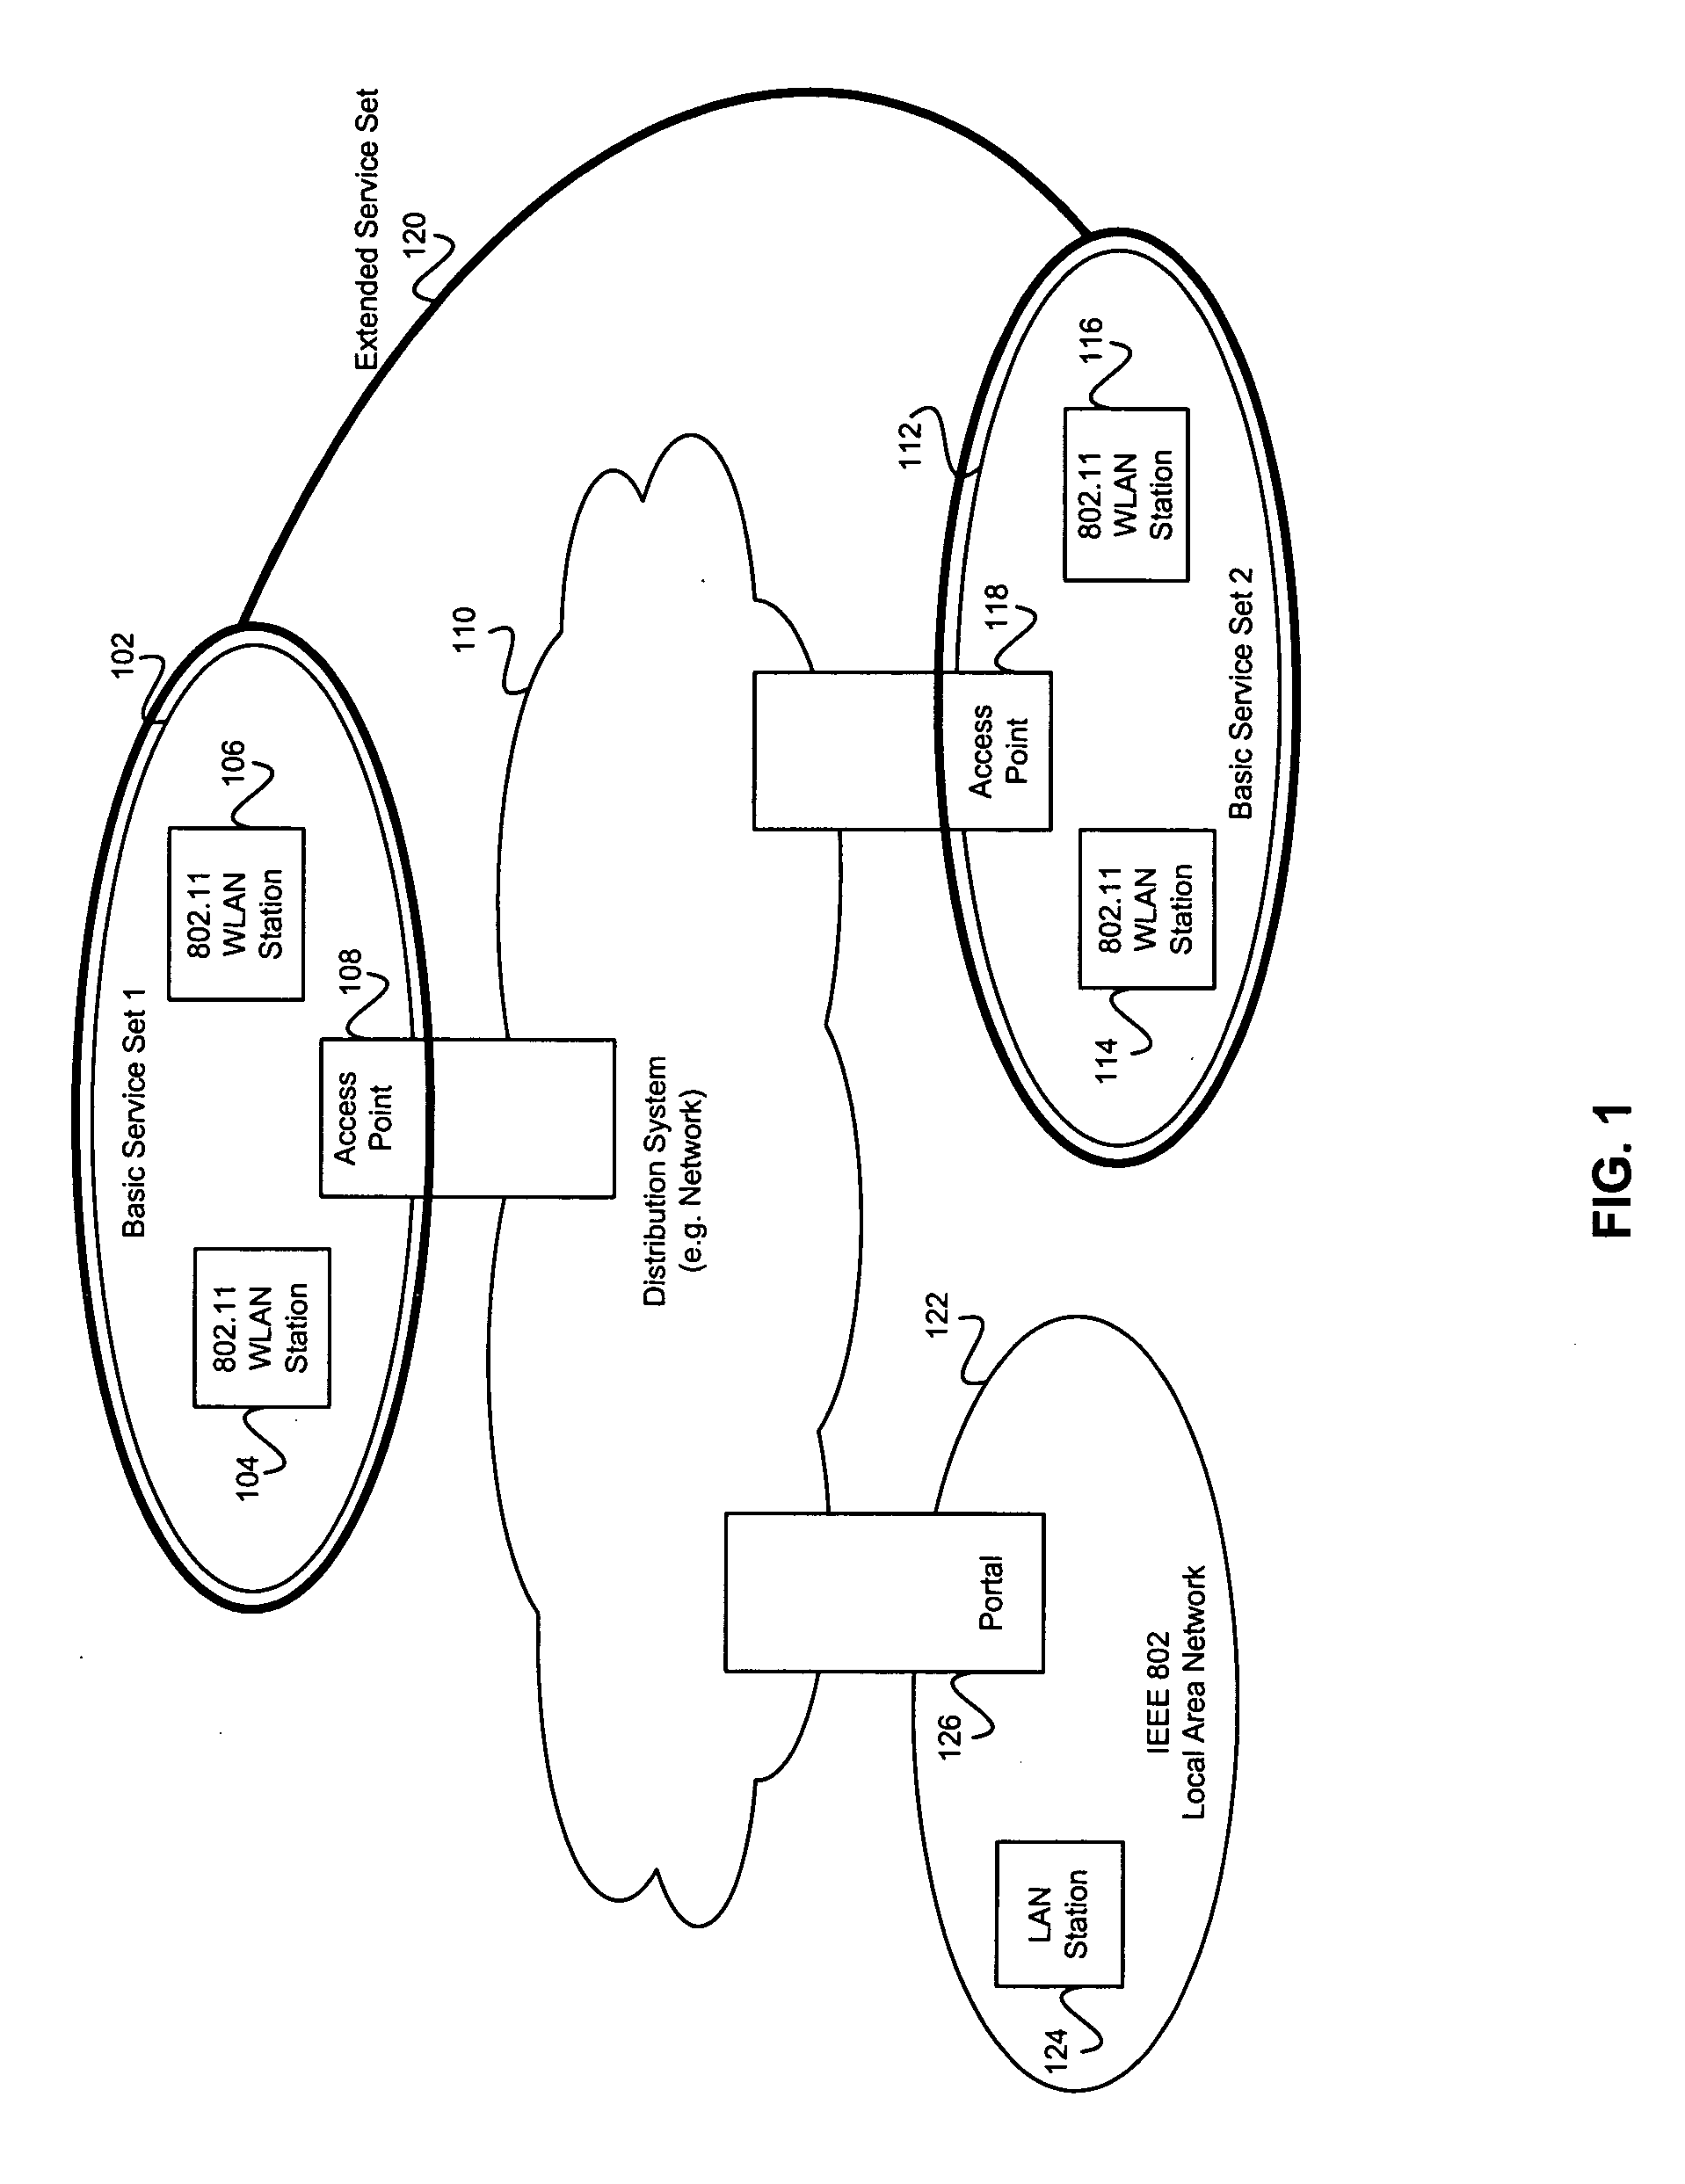 Method and system for minimizing effects of transmitter impairments in multiple input multiple output (MIMO) beamforming communication systems